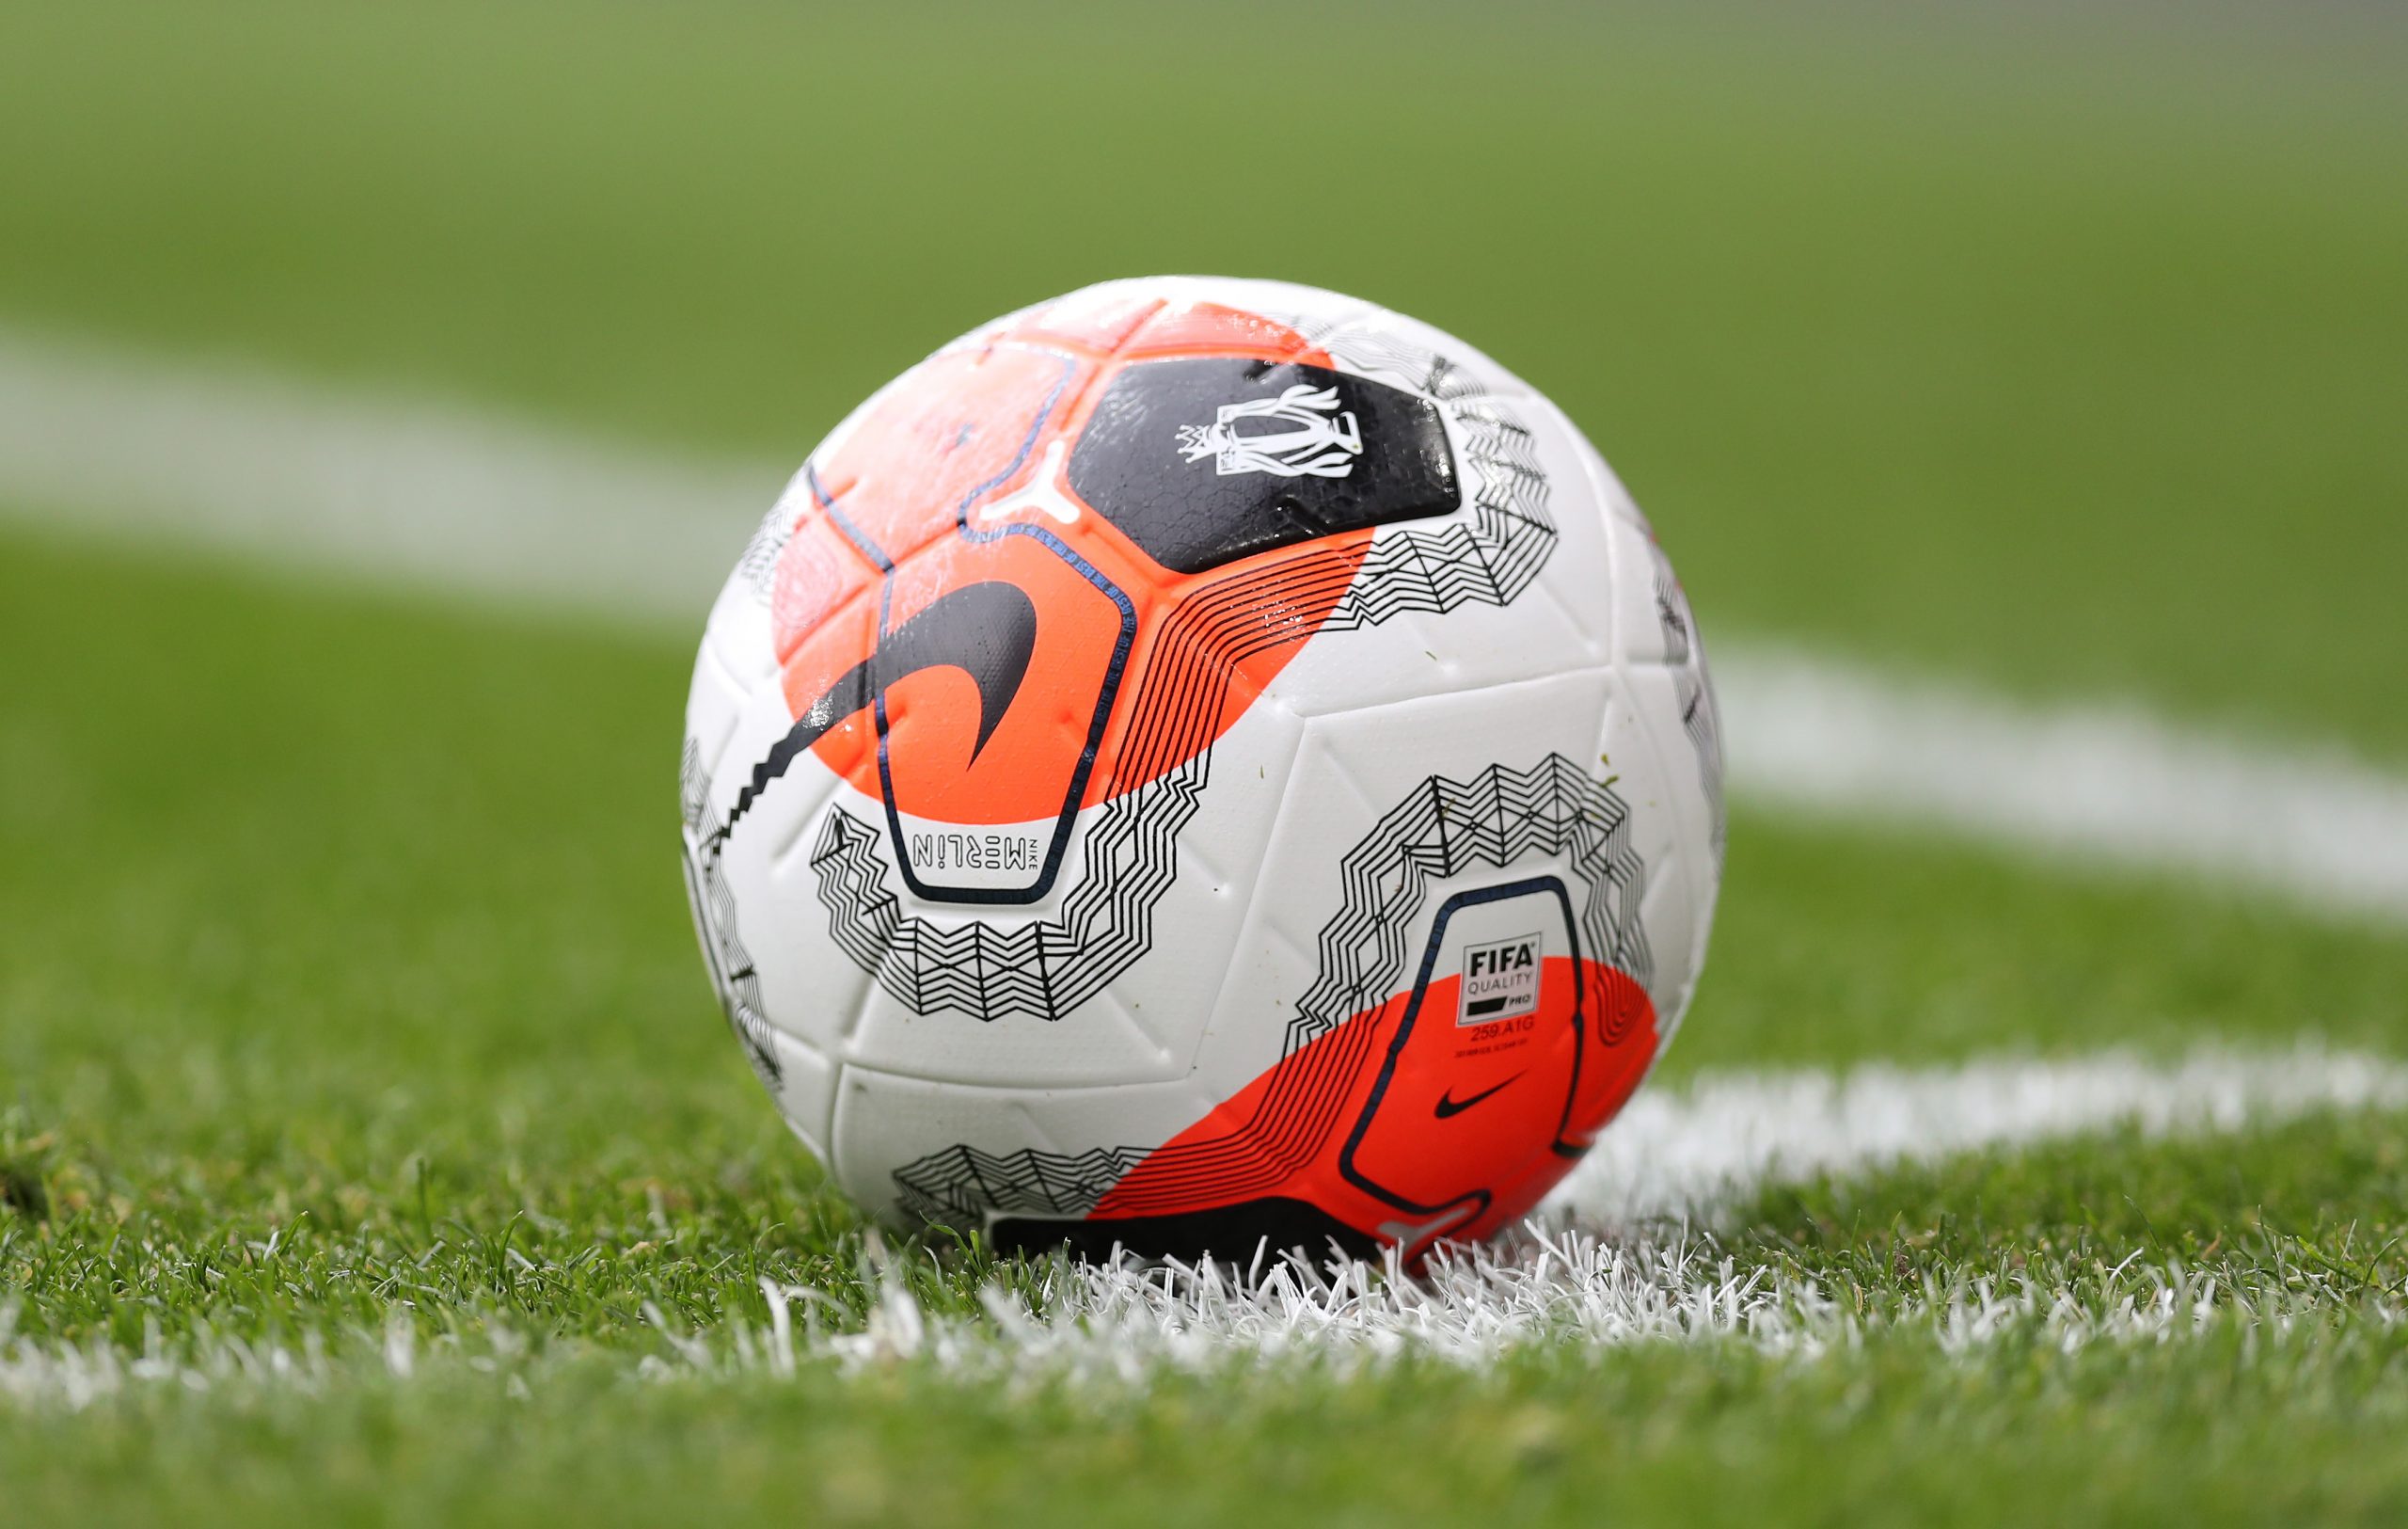 General view of the match ball during the Premier League match between Arsenal FC and West Ham United at Emirates Stadium on March 07, 2020 in London, United Kingdom.